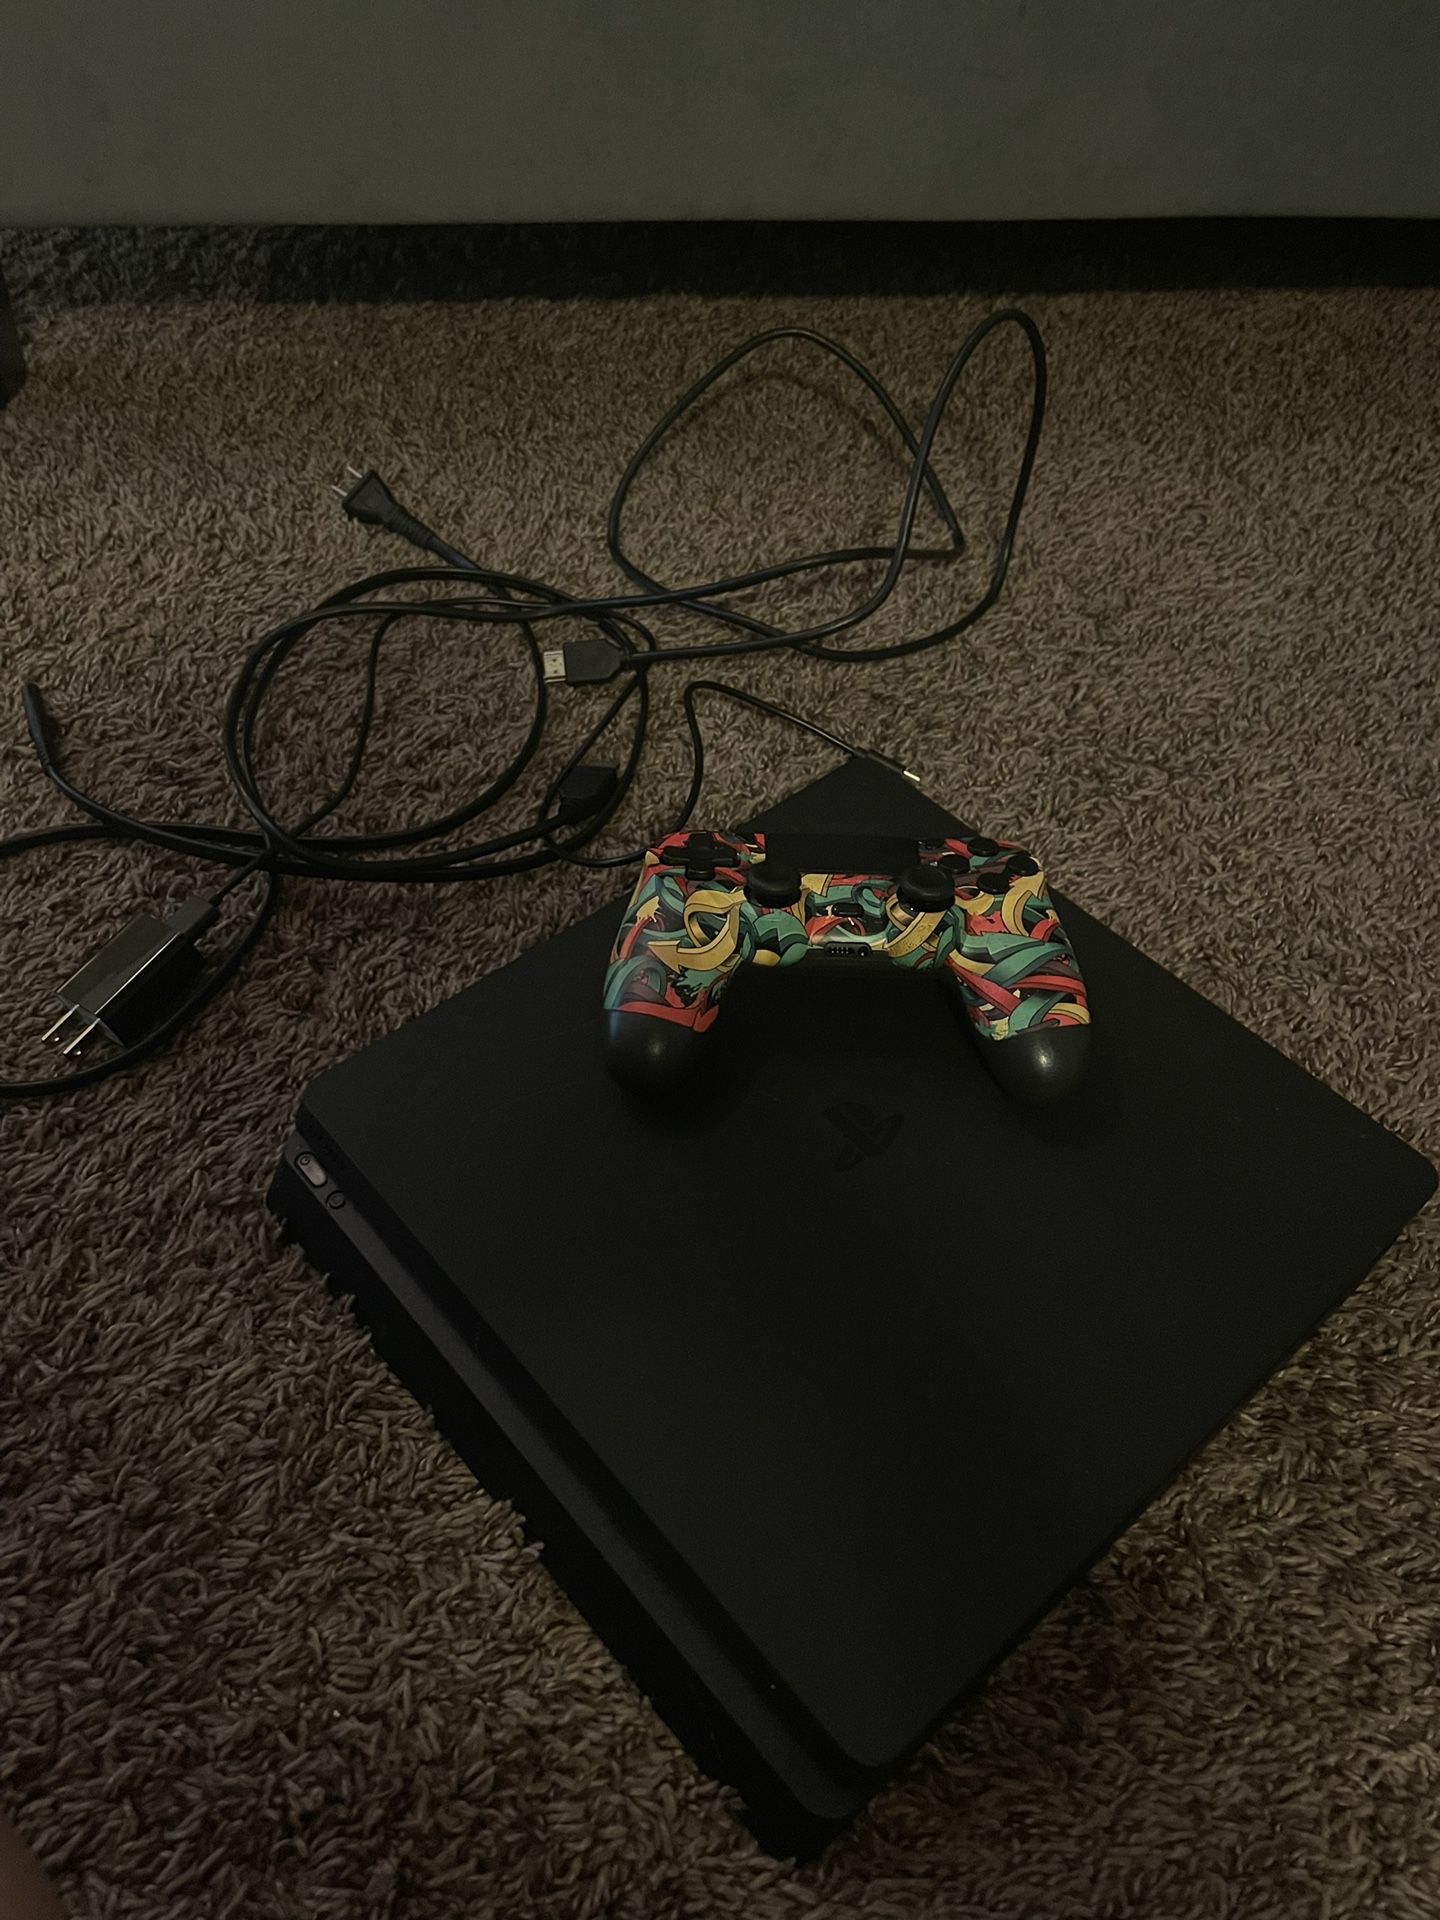 Playstation 4 SLIM & New PS4 Controller & HDMI Cord, PS4 Power Cord, Controller Charger